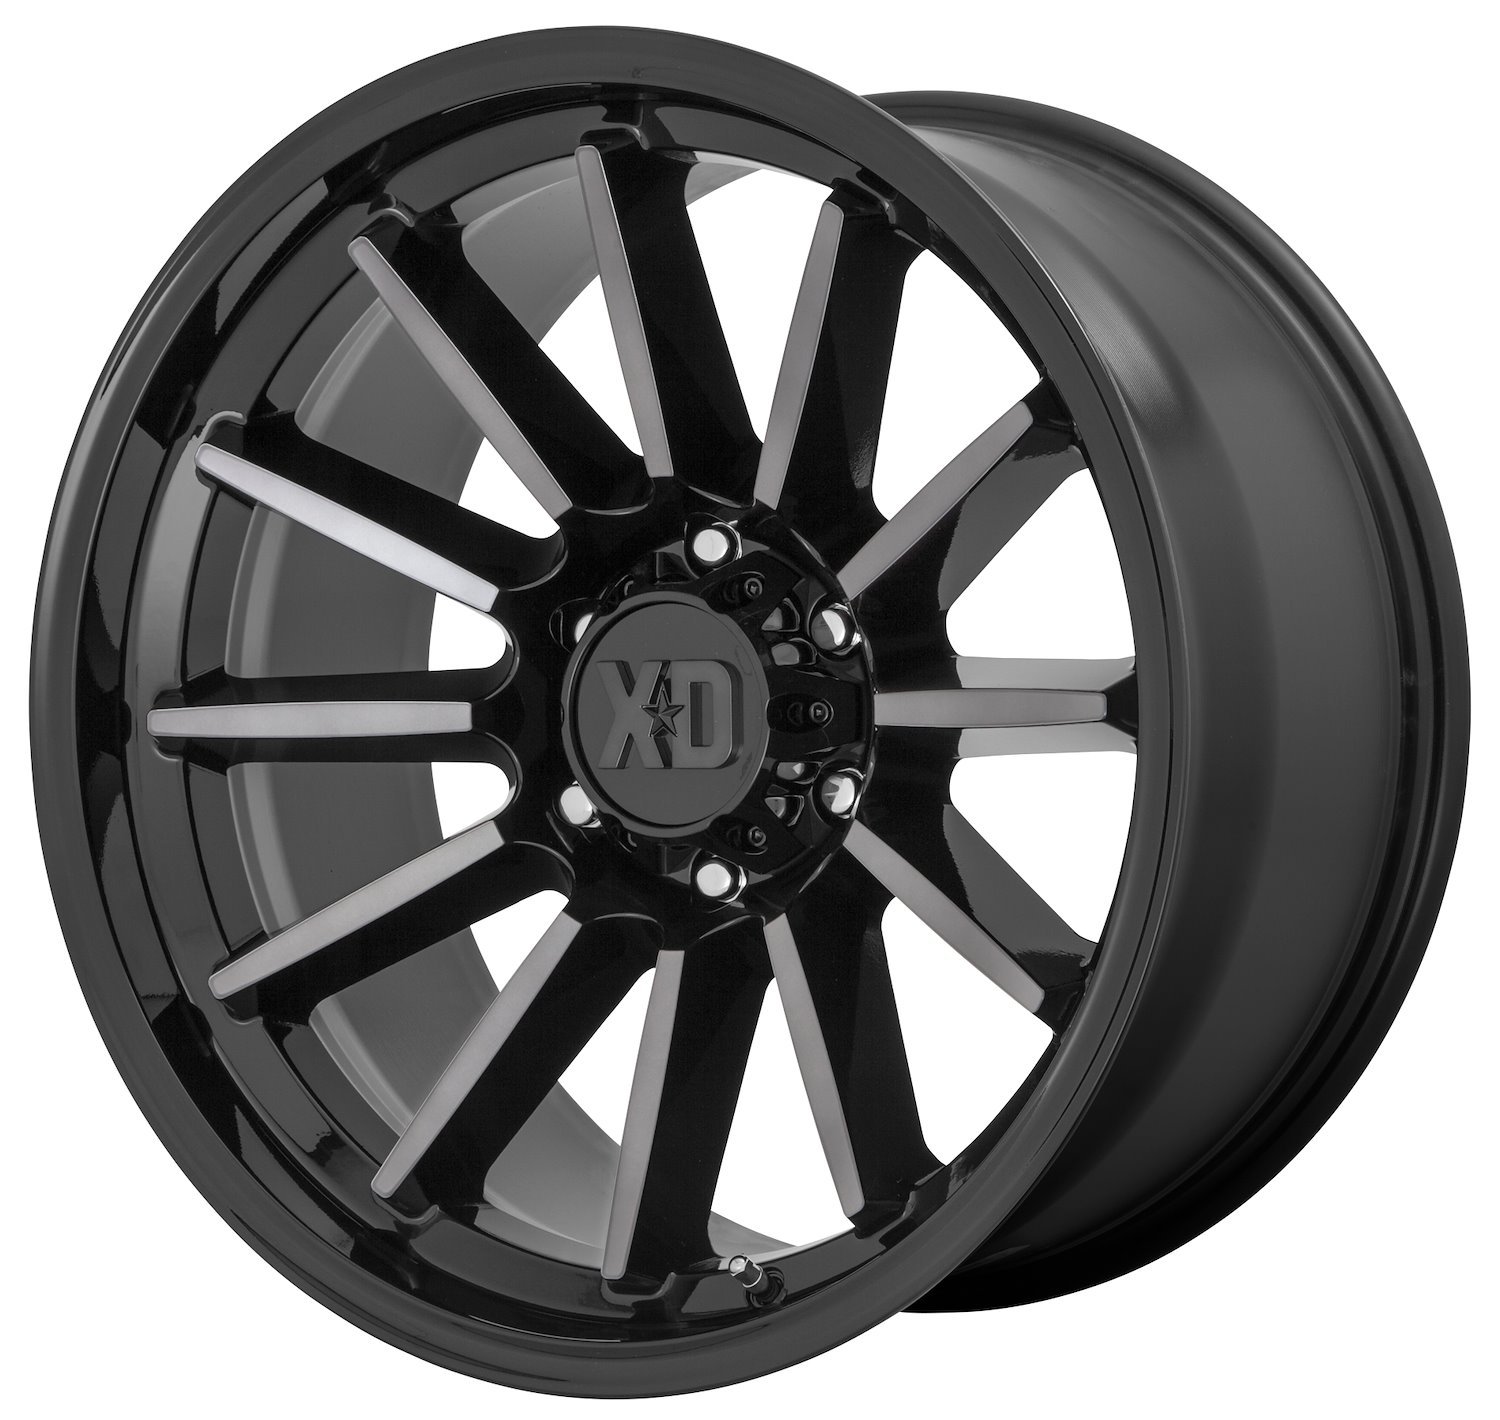 XD Wheels XD855 Luxe Wheel [Size: 20" x 10"] Gloss Black with Machined Gray Accents